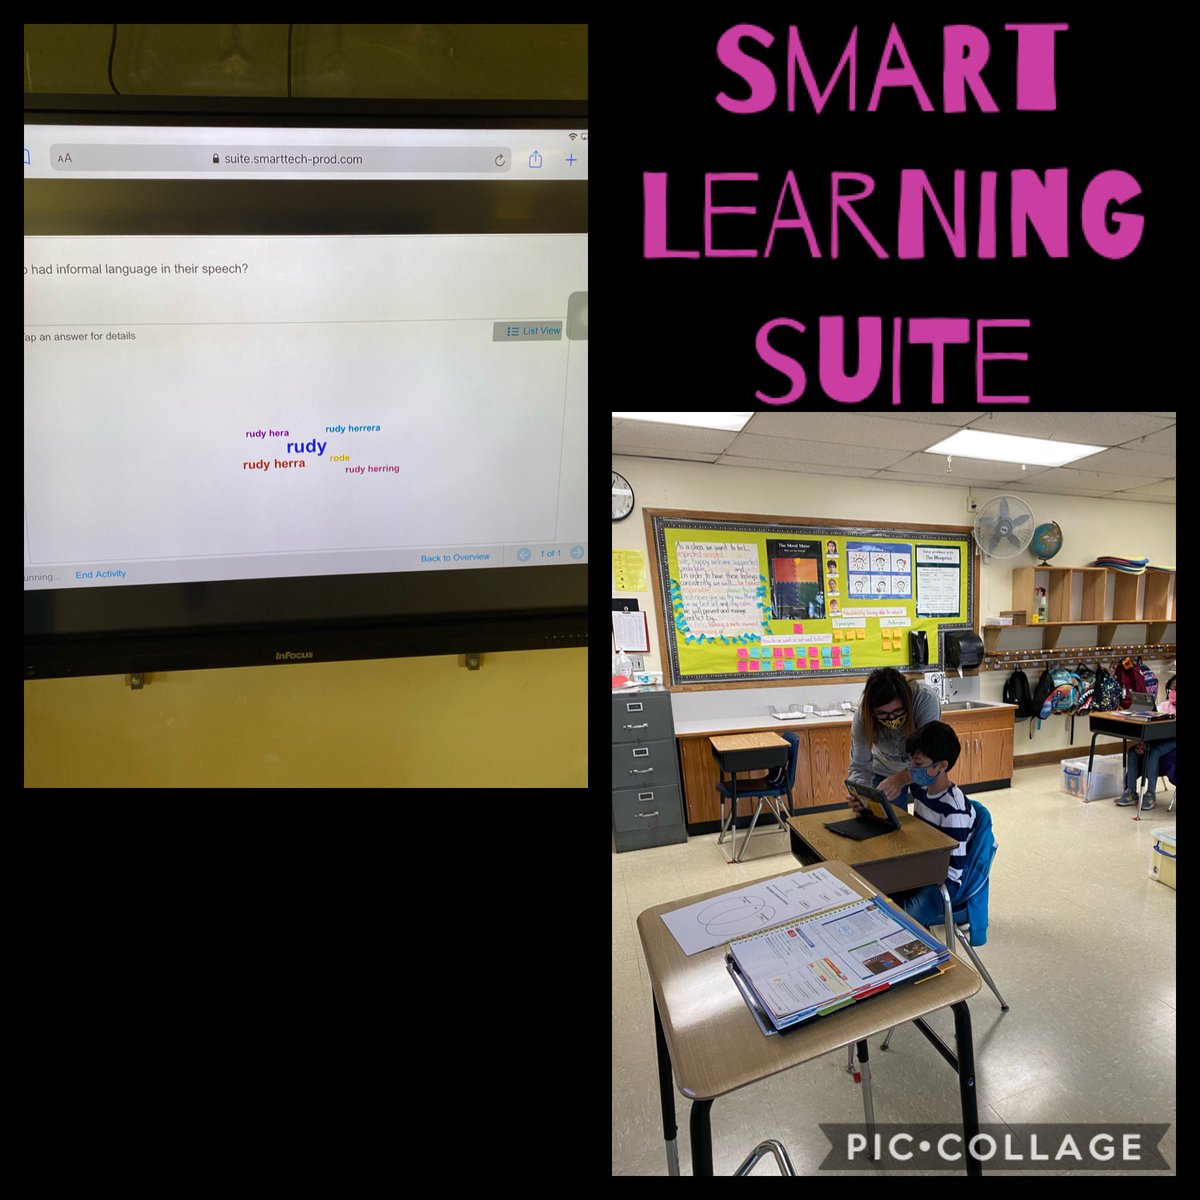 Ss using smart learning suite to share out their answers. @ColarossiChris @AJCanle @shawaveschool @C_Cosme19 @SRod_vs30